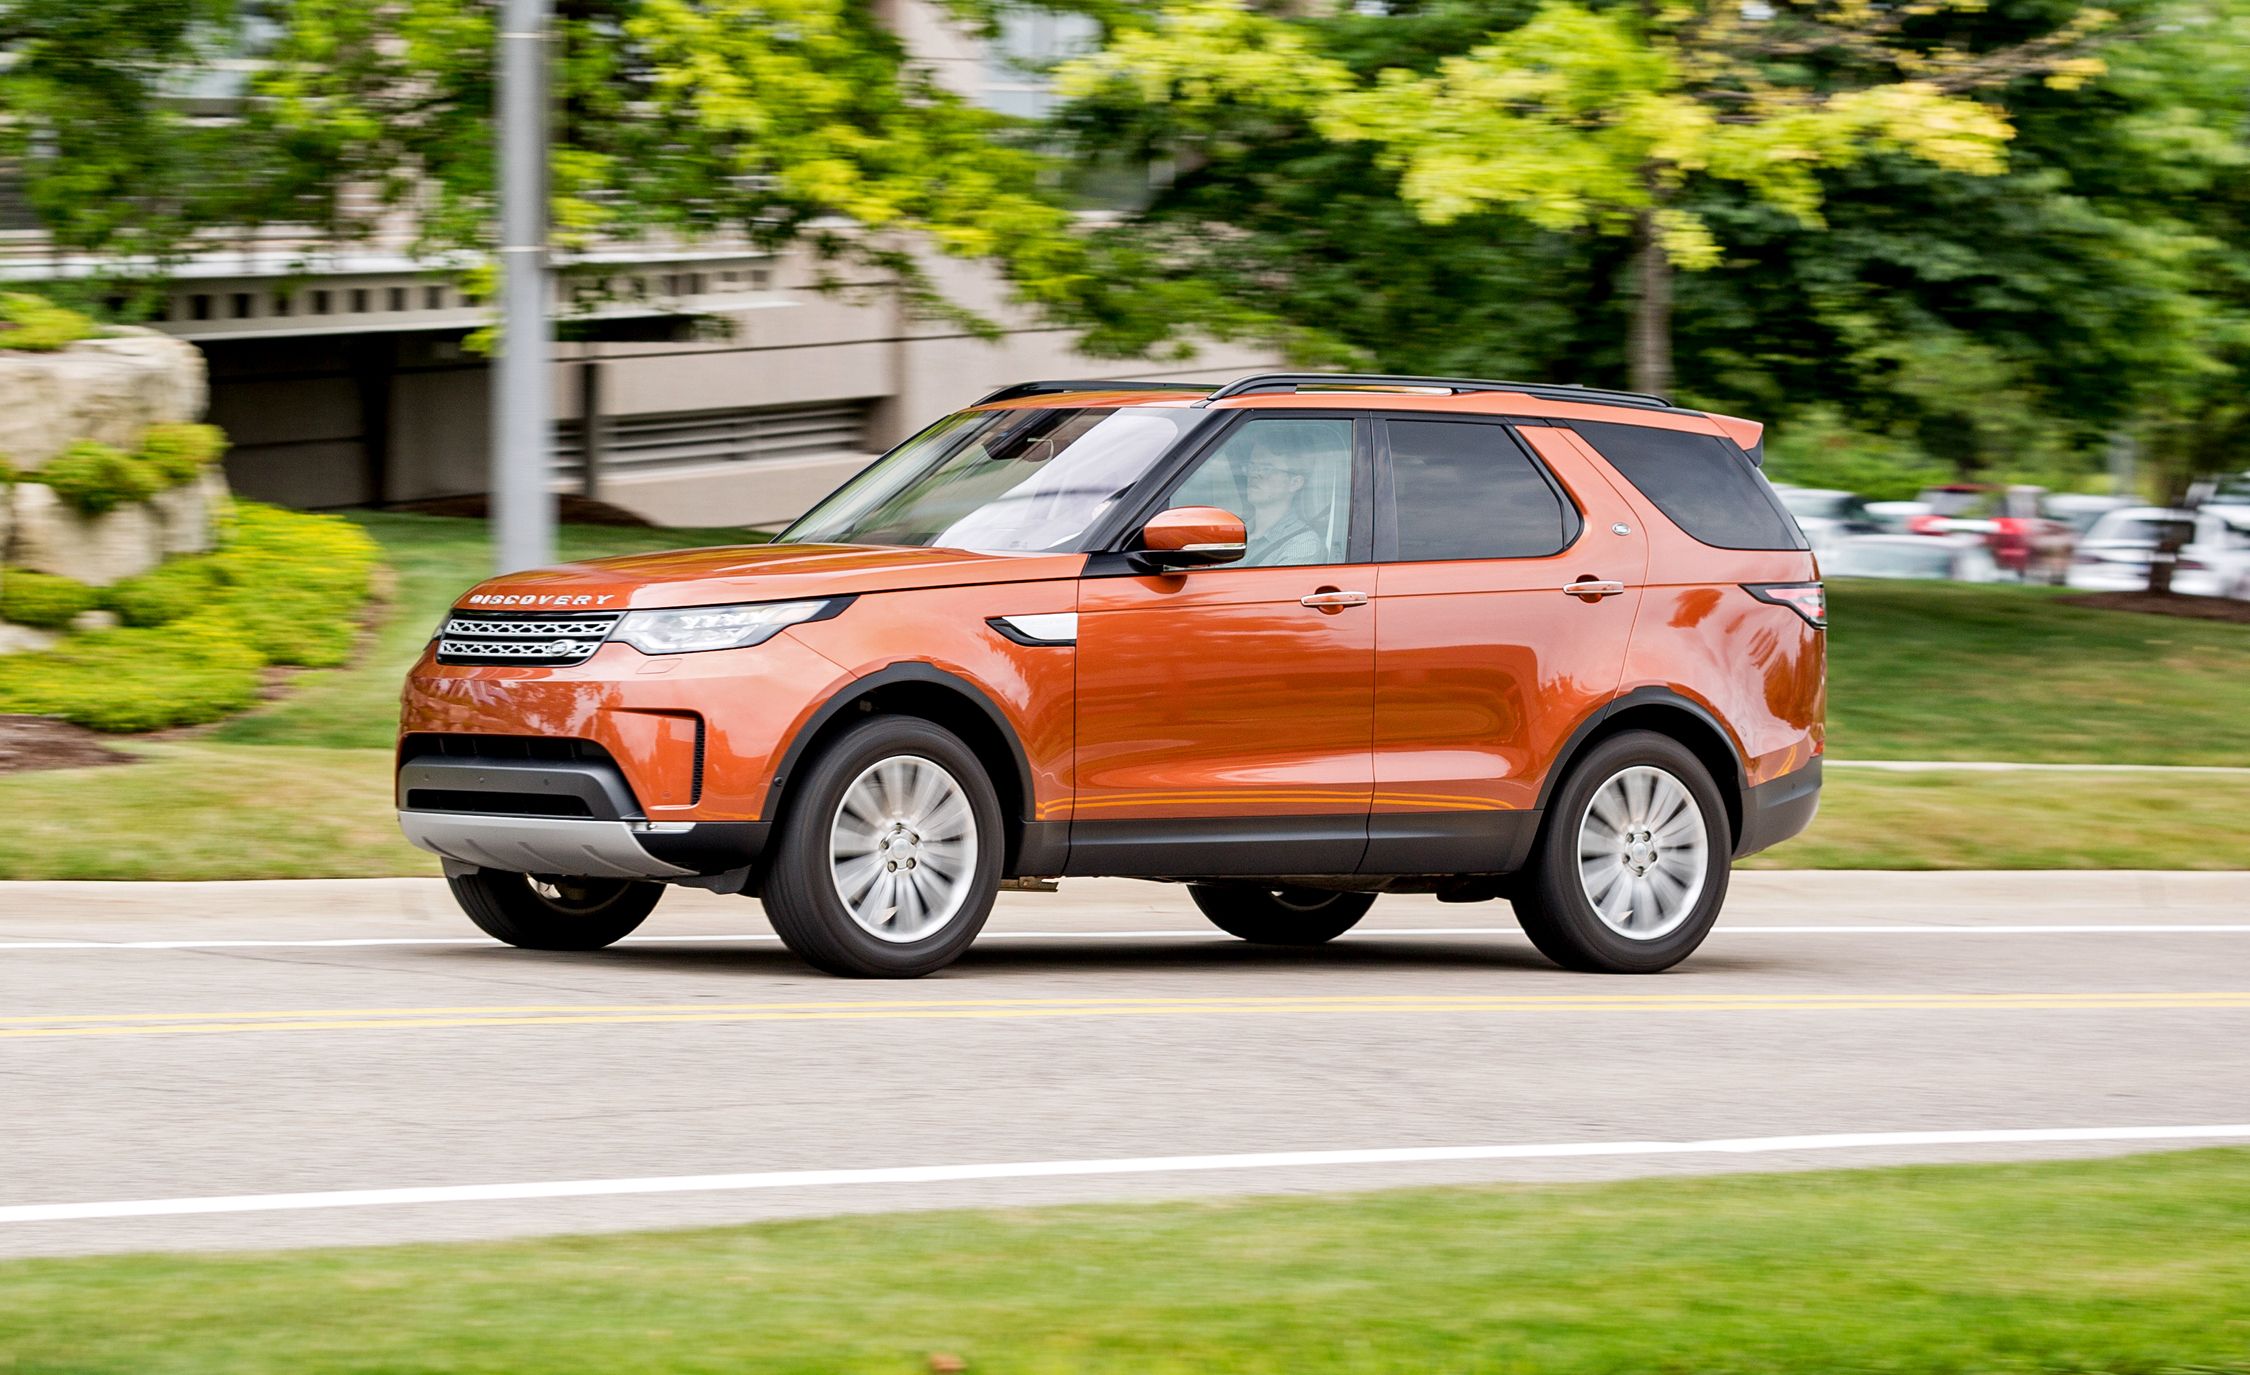 2017 Land Rover Discovery Review, Pricing, and Specs